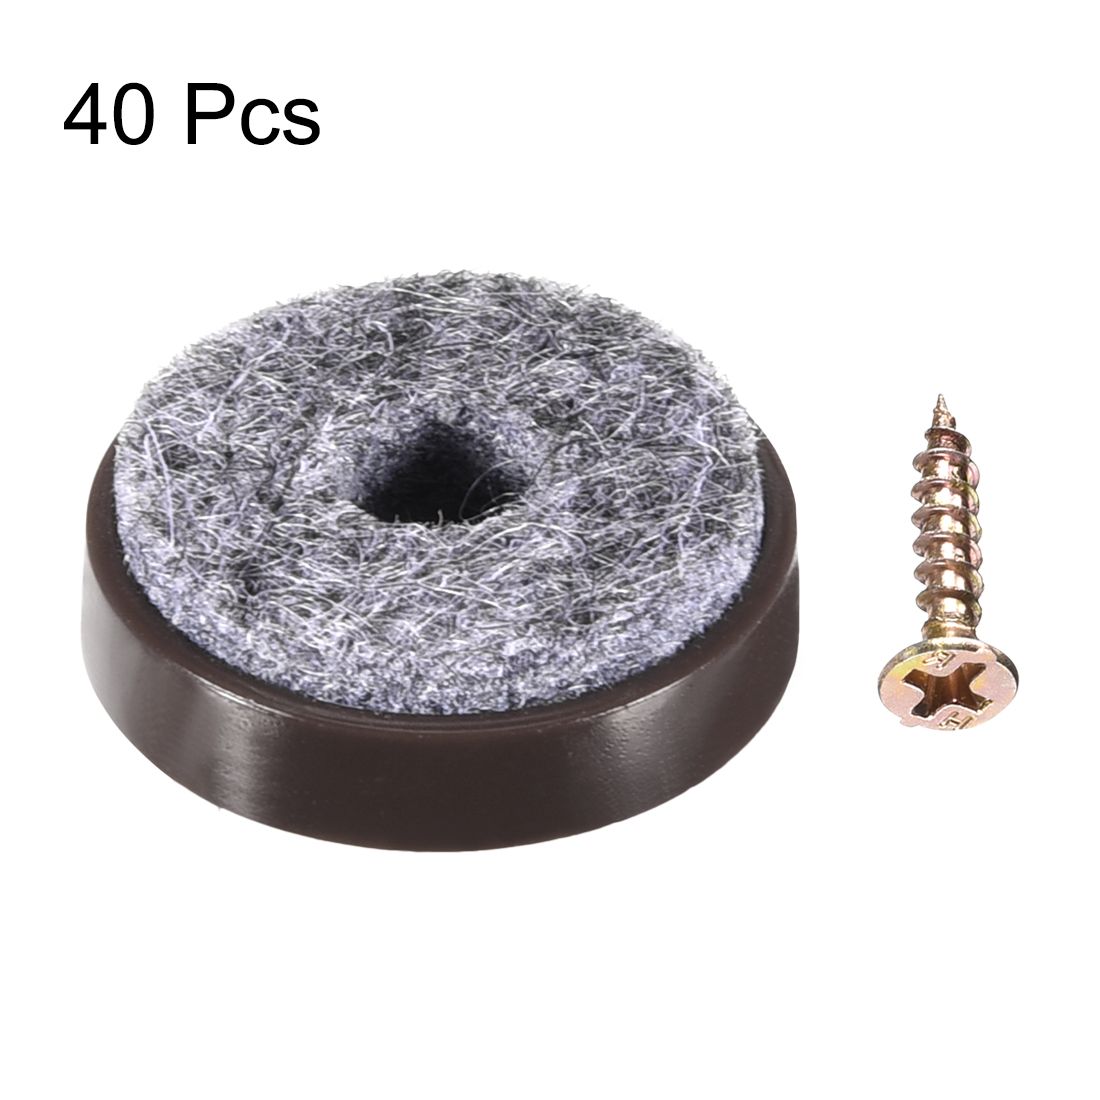 Unique Bargains Furniture Feet Nail Protector Screw-in 24mm Dia for Wooden Table Chair Leg 40pcs